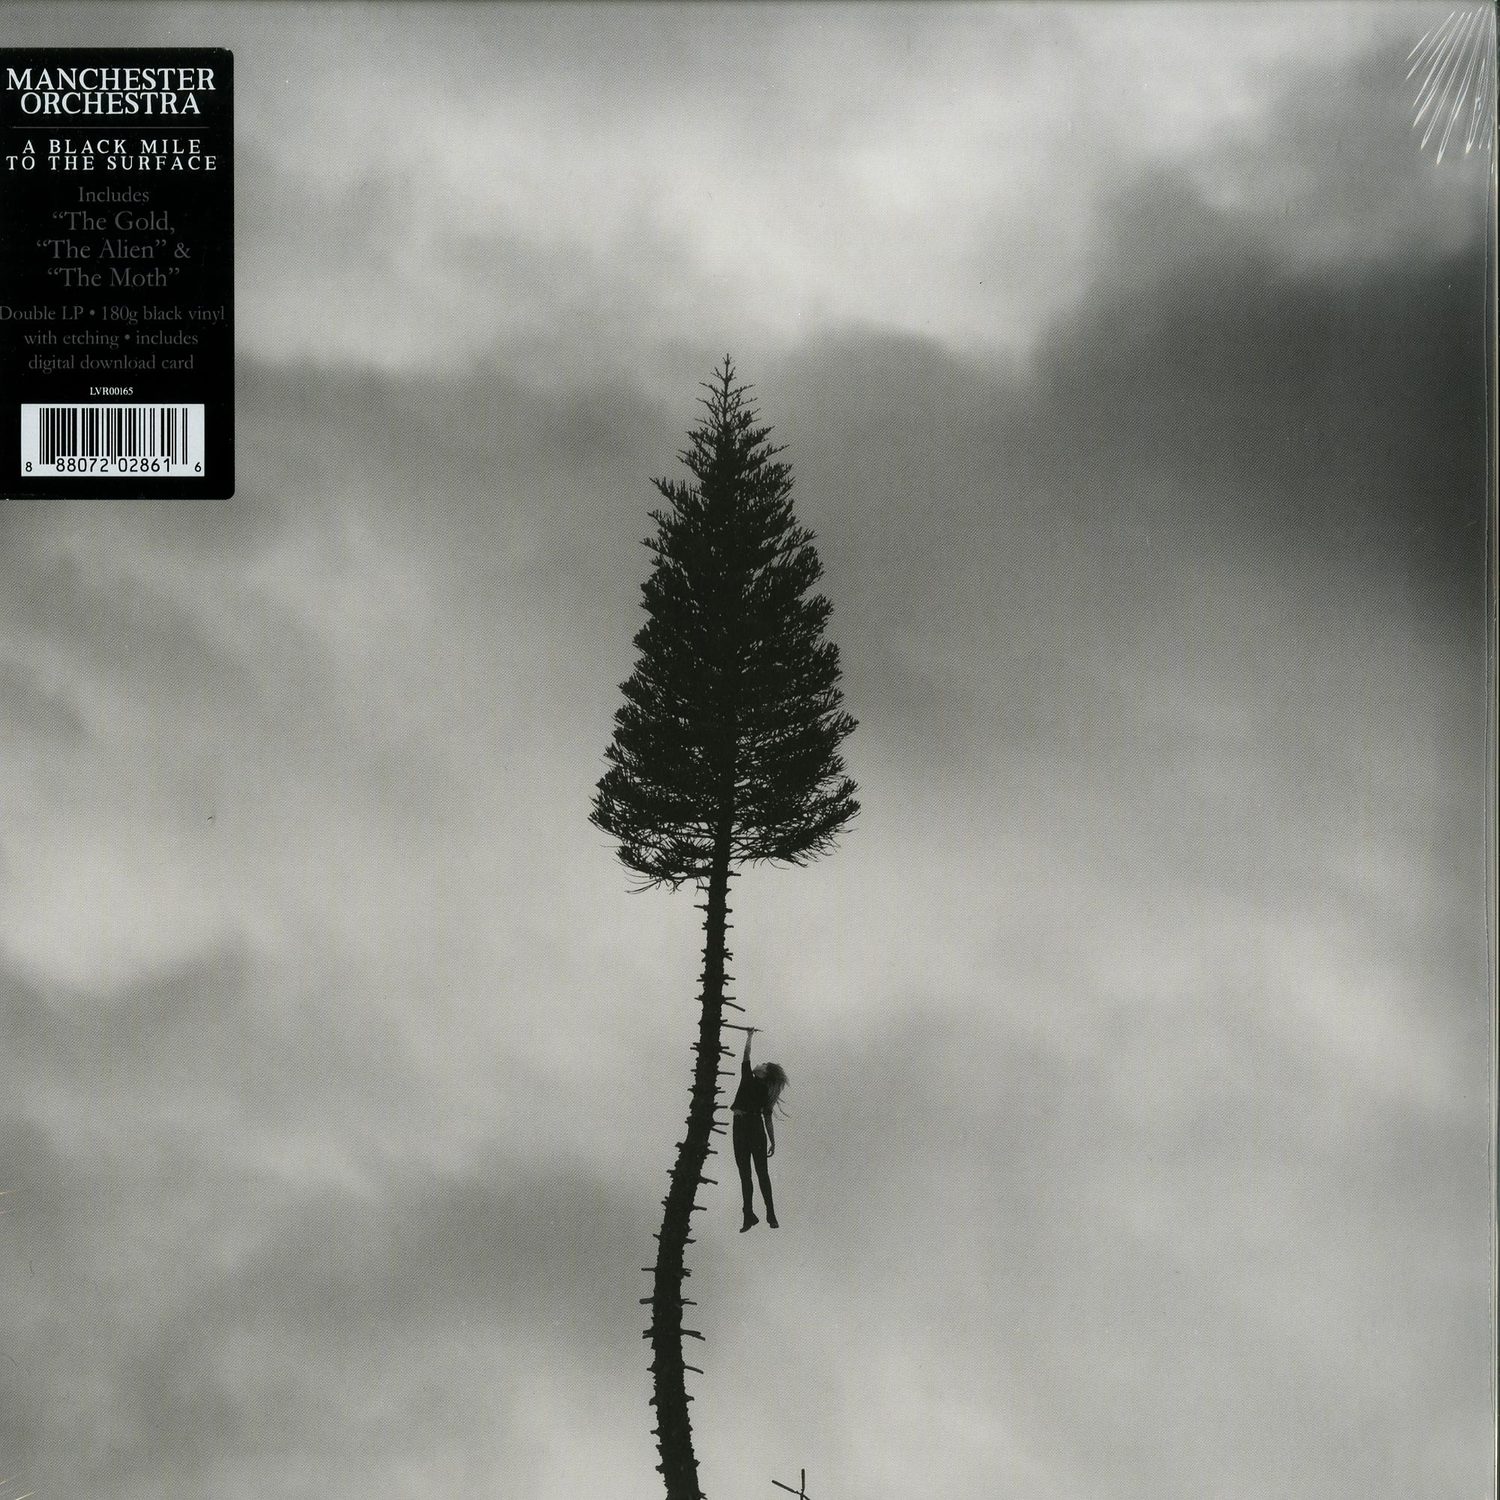 Manchester Orchestra - A BLACK MILE TO THE SURFACE 